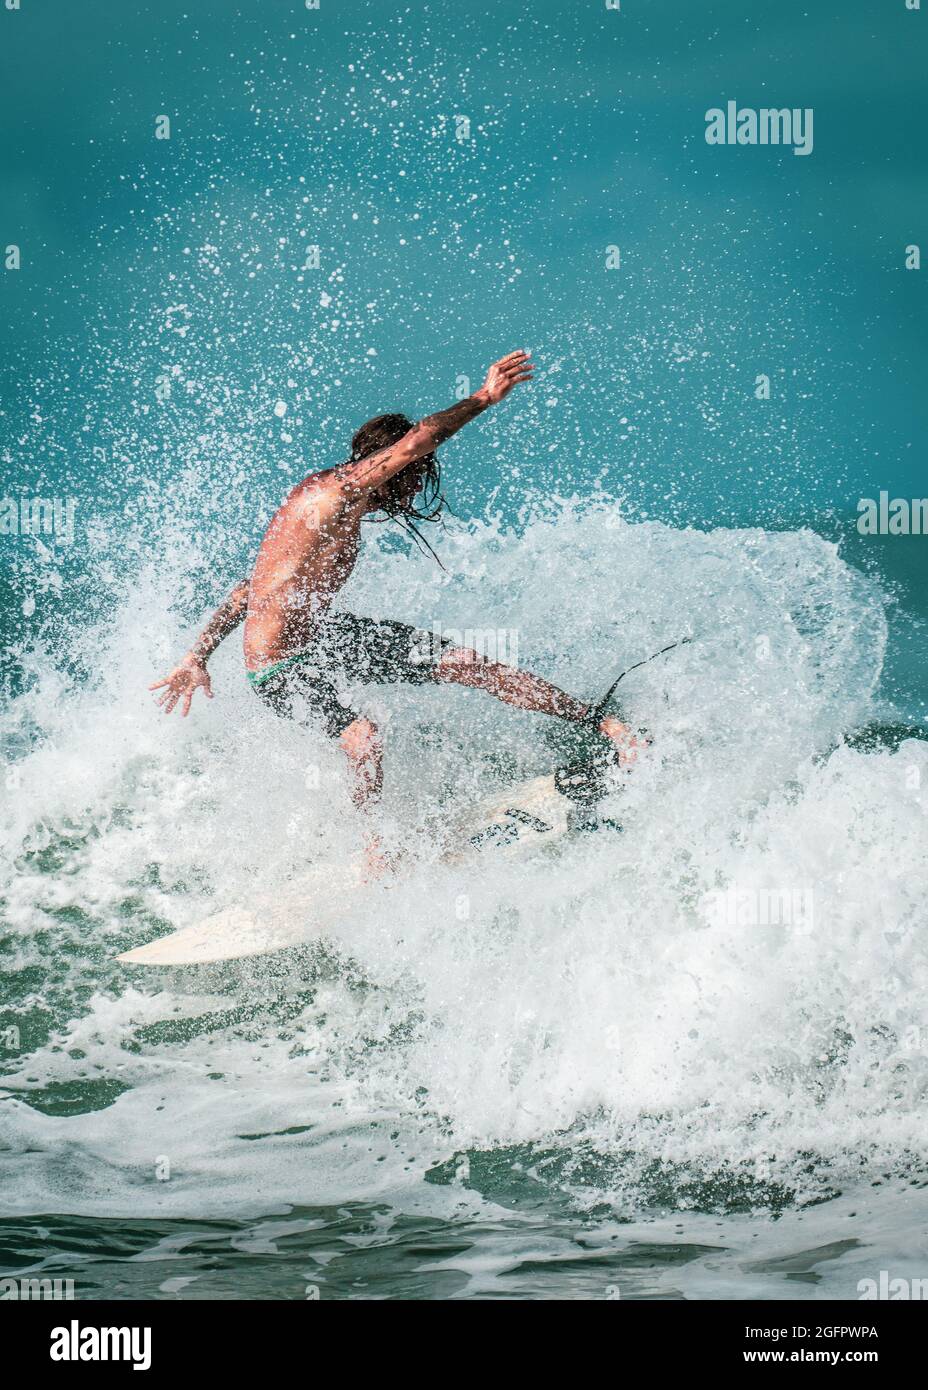 Playa Hermosa, Guanacaste, Costa Rica - 07.26.2020: A professional local surfer doing stunts and tricks on powerful splashy waves at the Pacific Coast Stock Photo